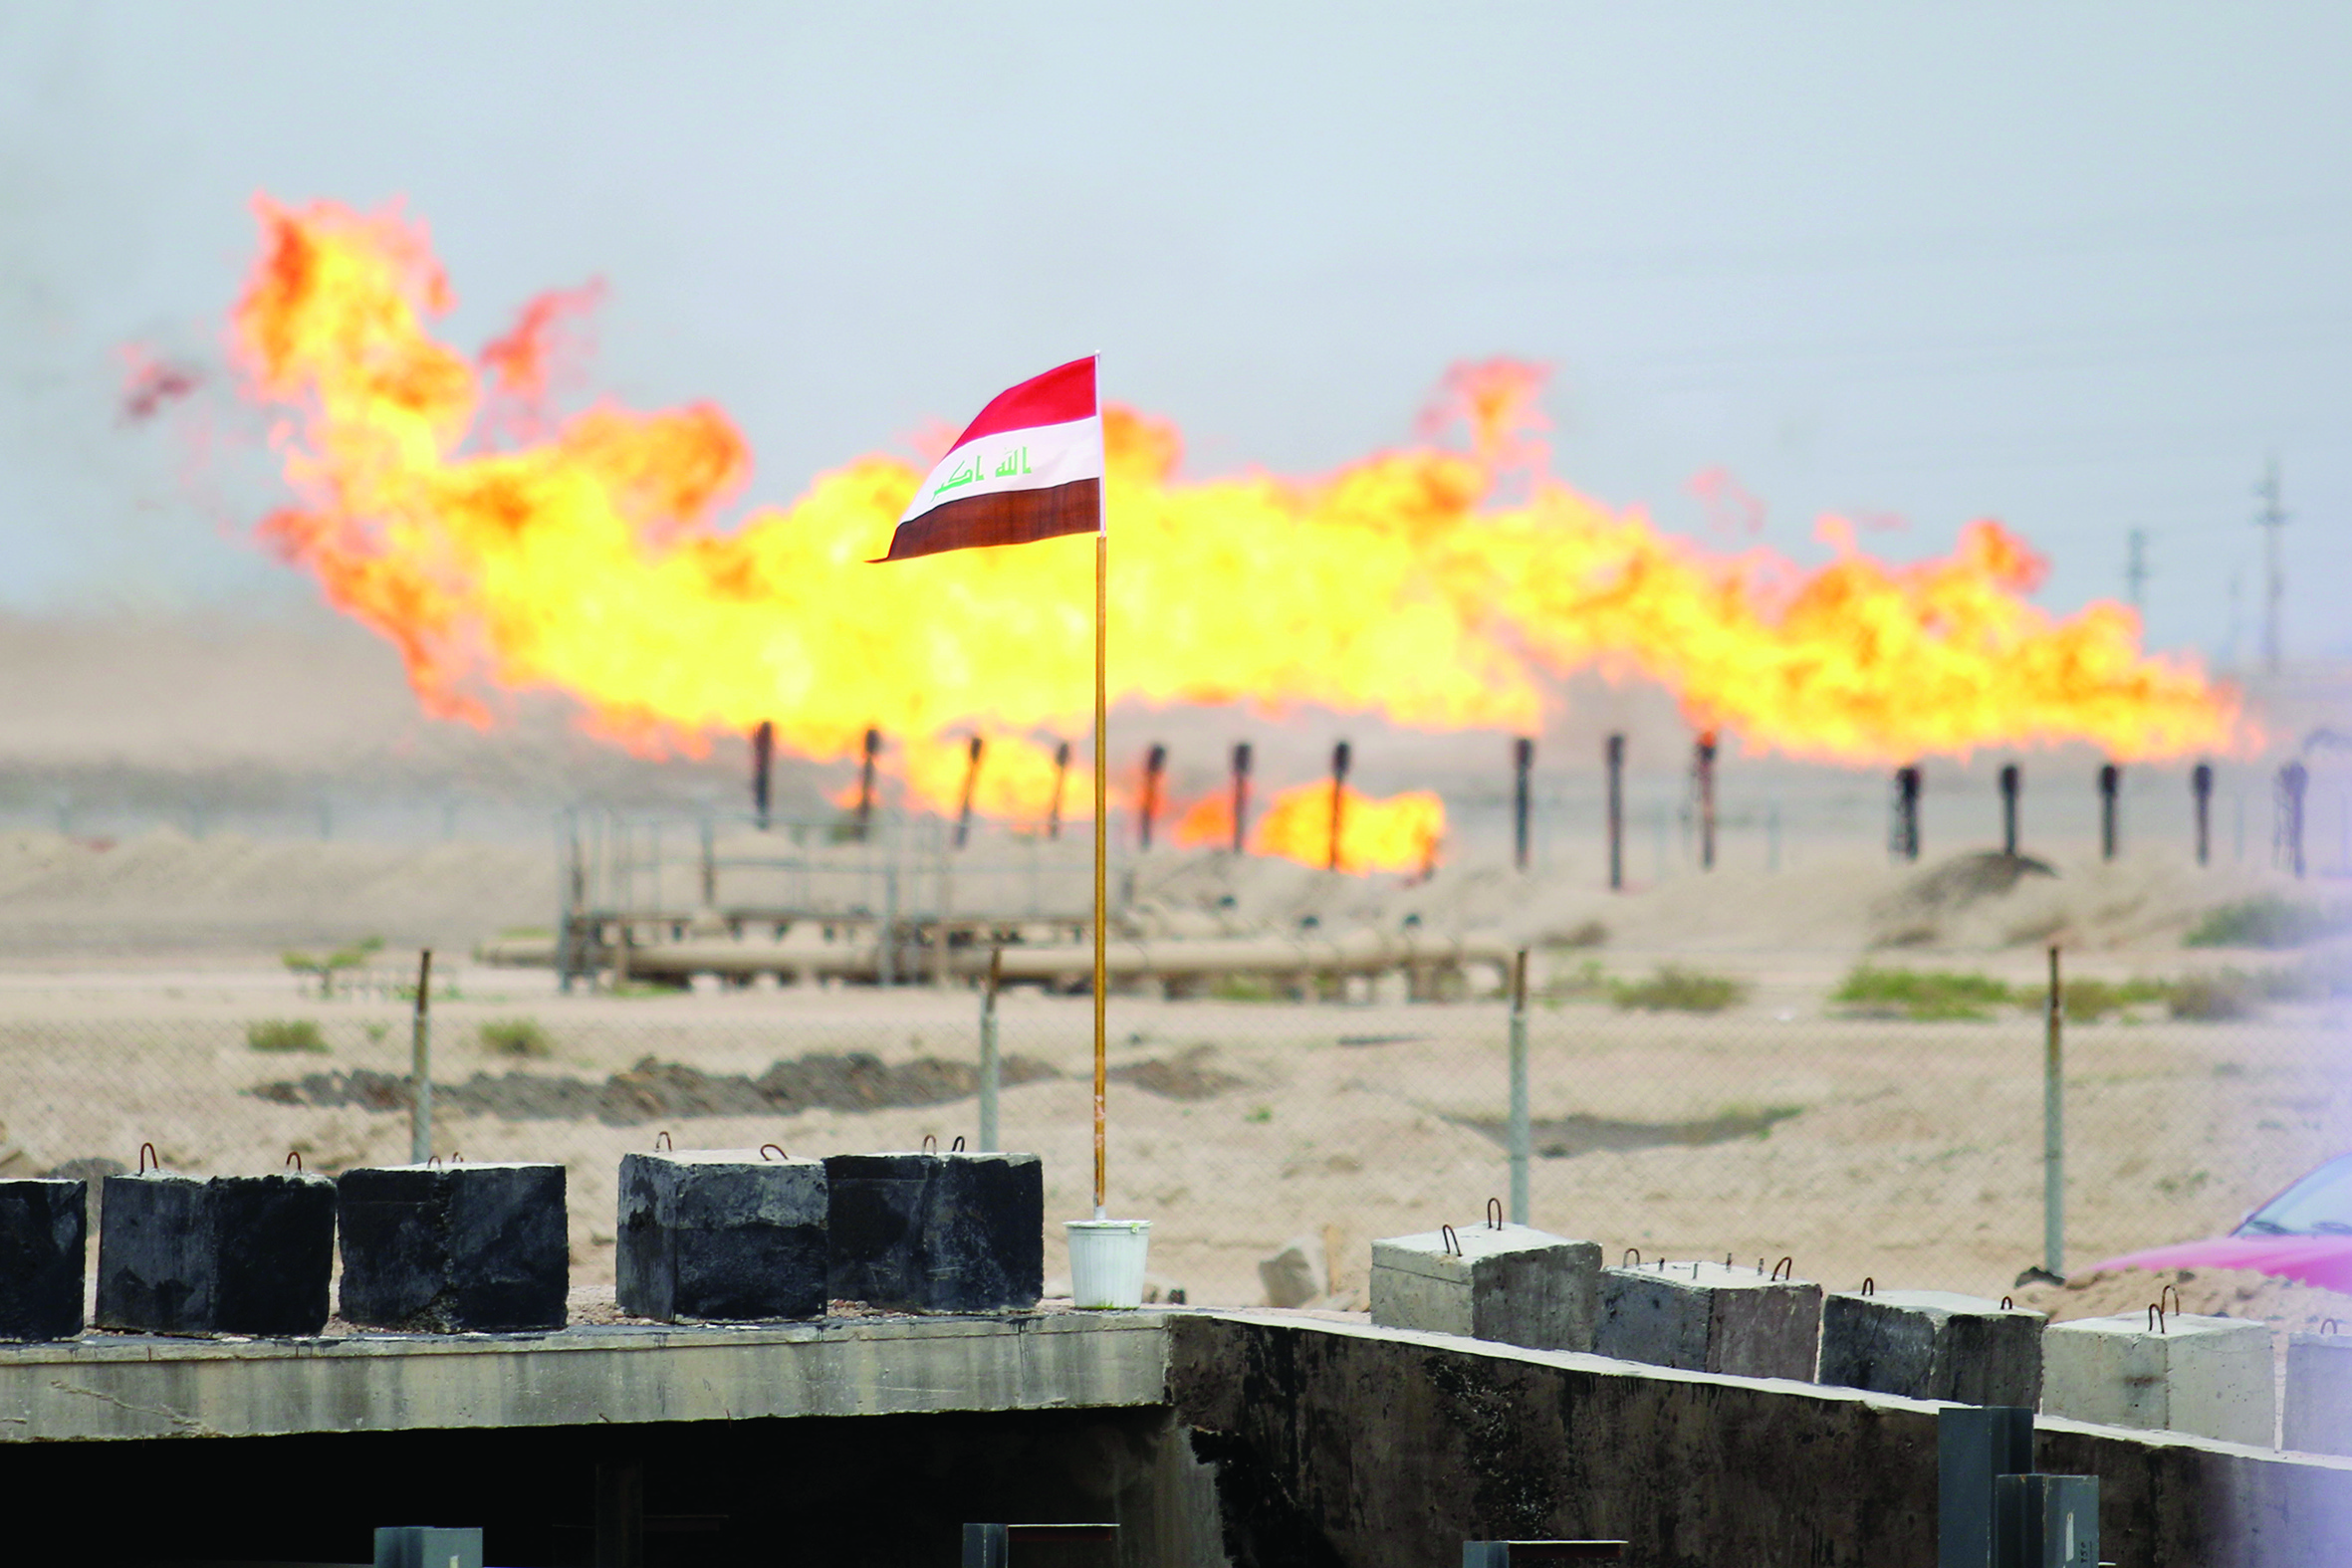 (FILES) This file photo taken on March 3, 2016, shows a an Iraqi national flag flying before front of excess gas being burnt off, at a pipeline in the newly opened section of the oil refinery of Zubair, southwest of Basra in southern Iraq. - As crude prices plunge, Iraq's oil sector is facing a triple threat that has slashed revenues, risks denting production and may spell trouble for future exports. (Photo by HAIDAR MOHAMMED ALI / AFP)